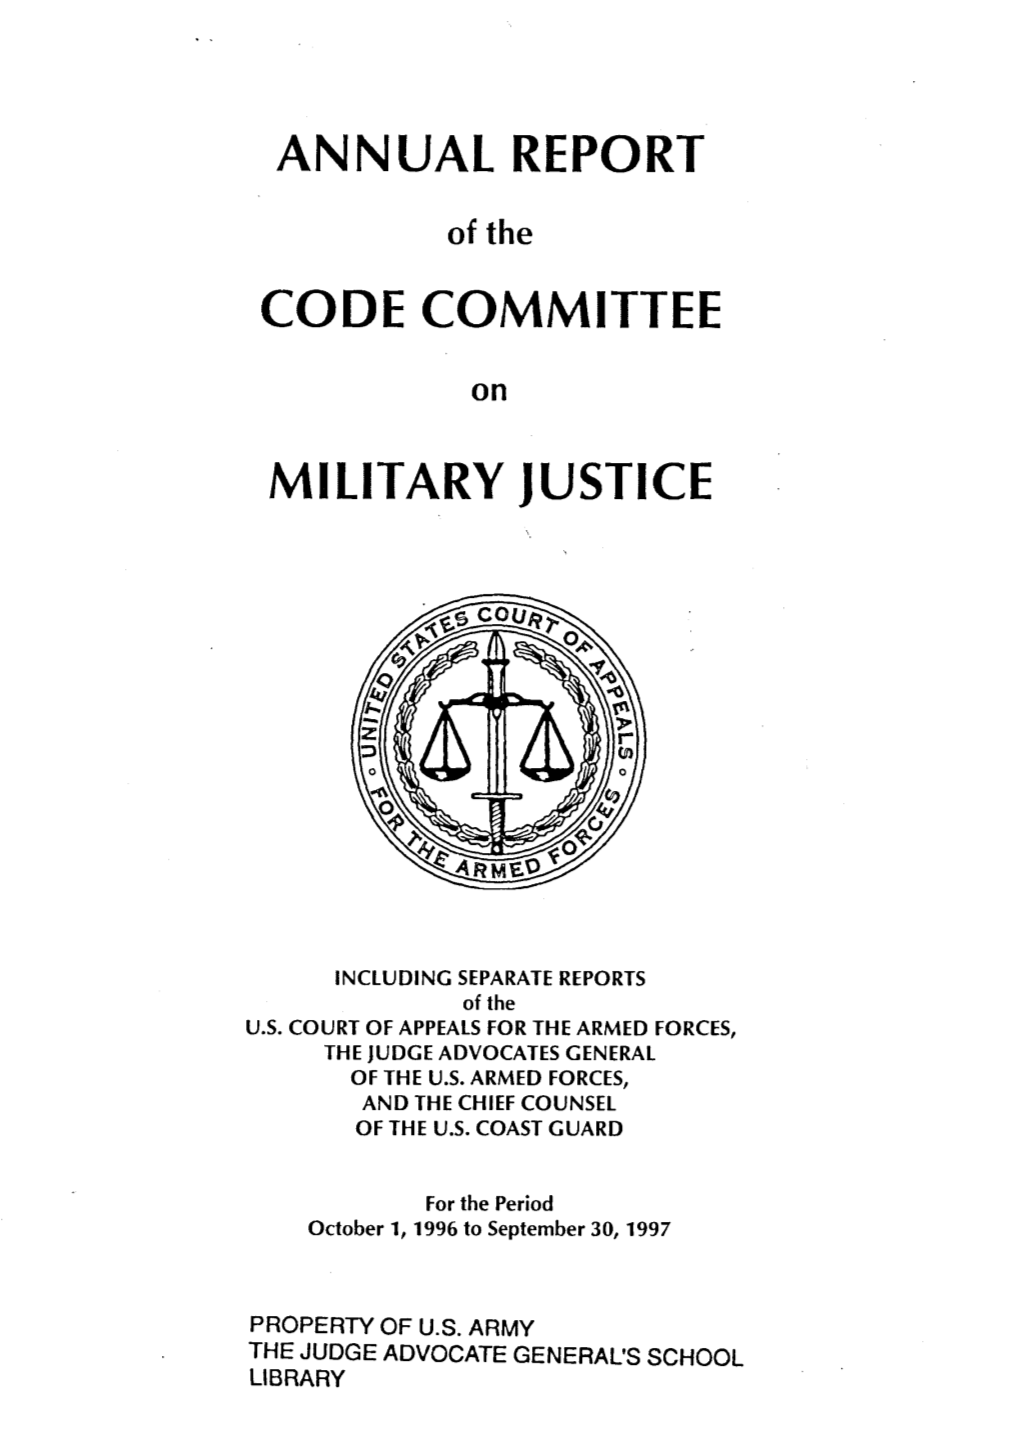 Annual Reports of the Code Committee on Military Justice Includint Separate Reports of the U.S. Court of Military Appeals, the J